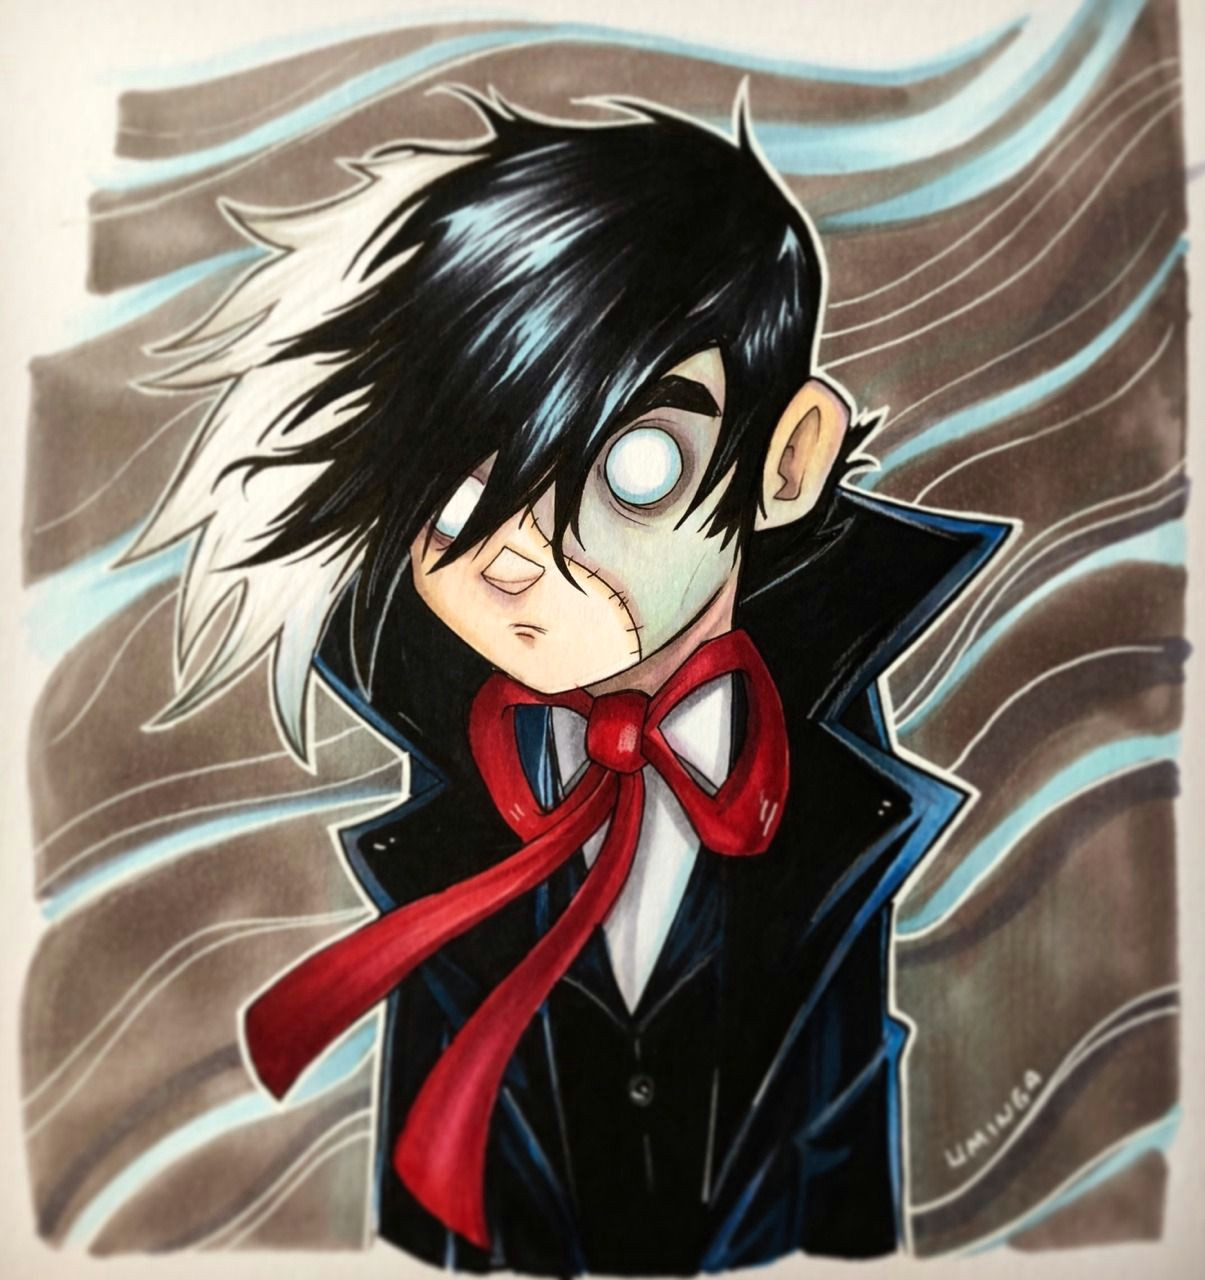 black jack commission i don t get a lot of anime requests so this was a fun one blackjack anime copic commission originalart traditionalart drawing